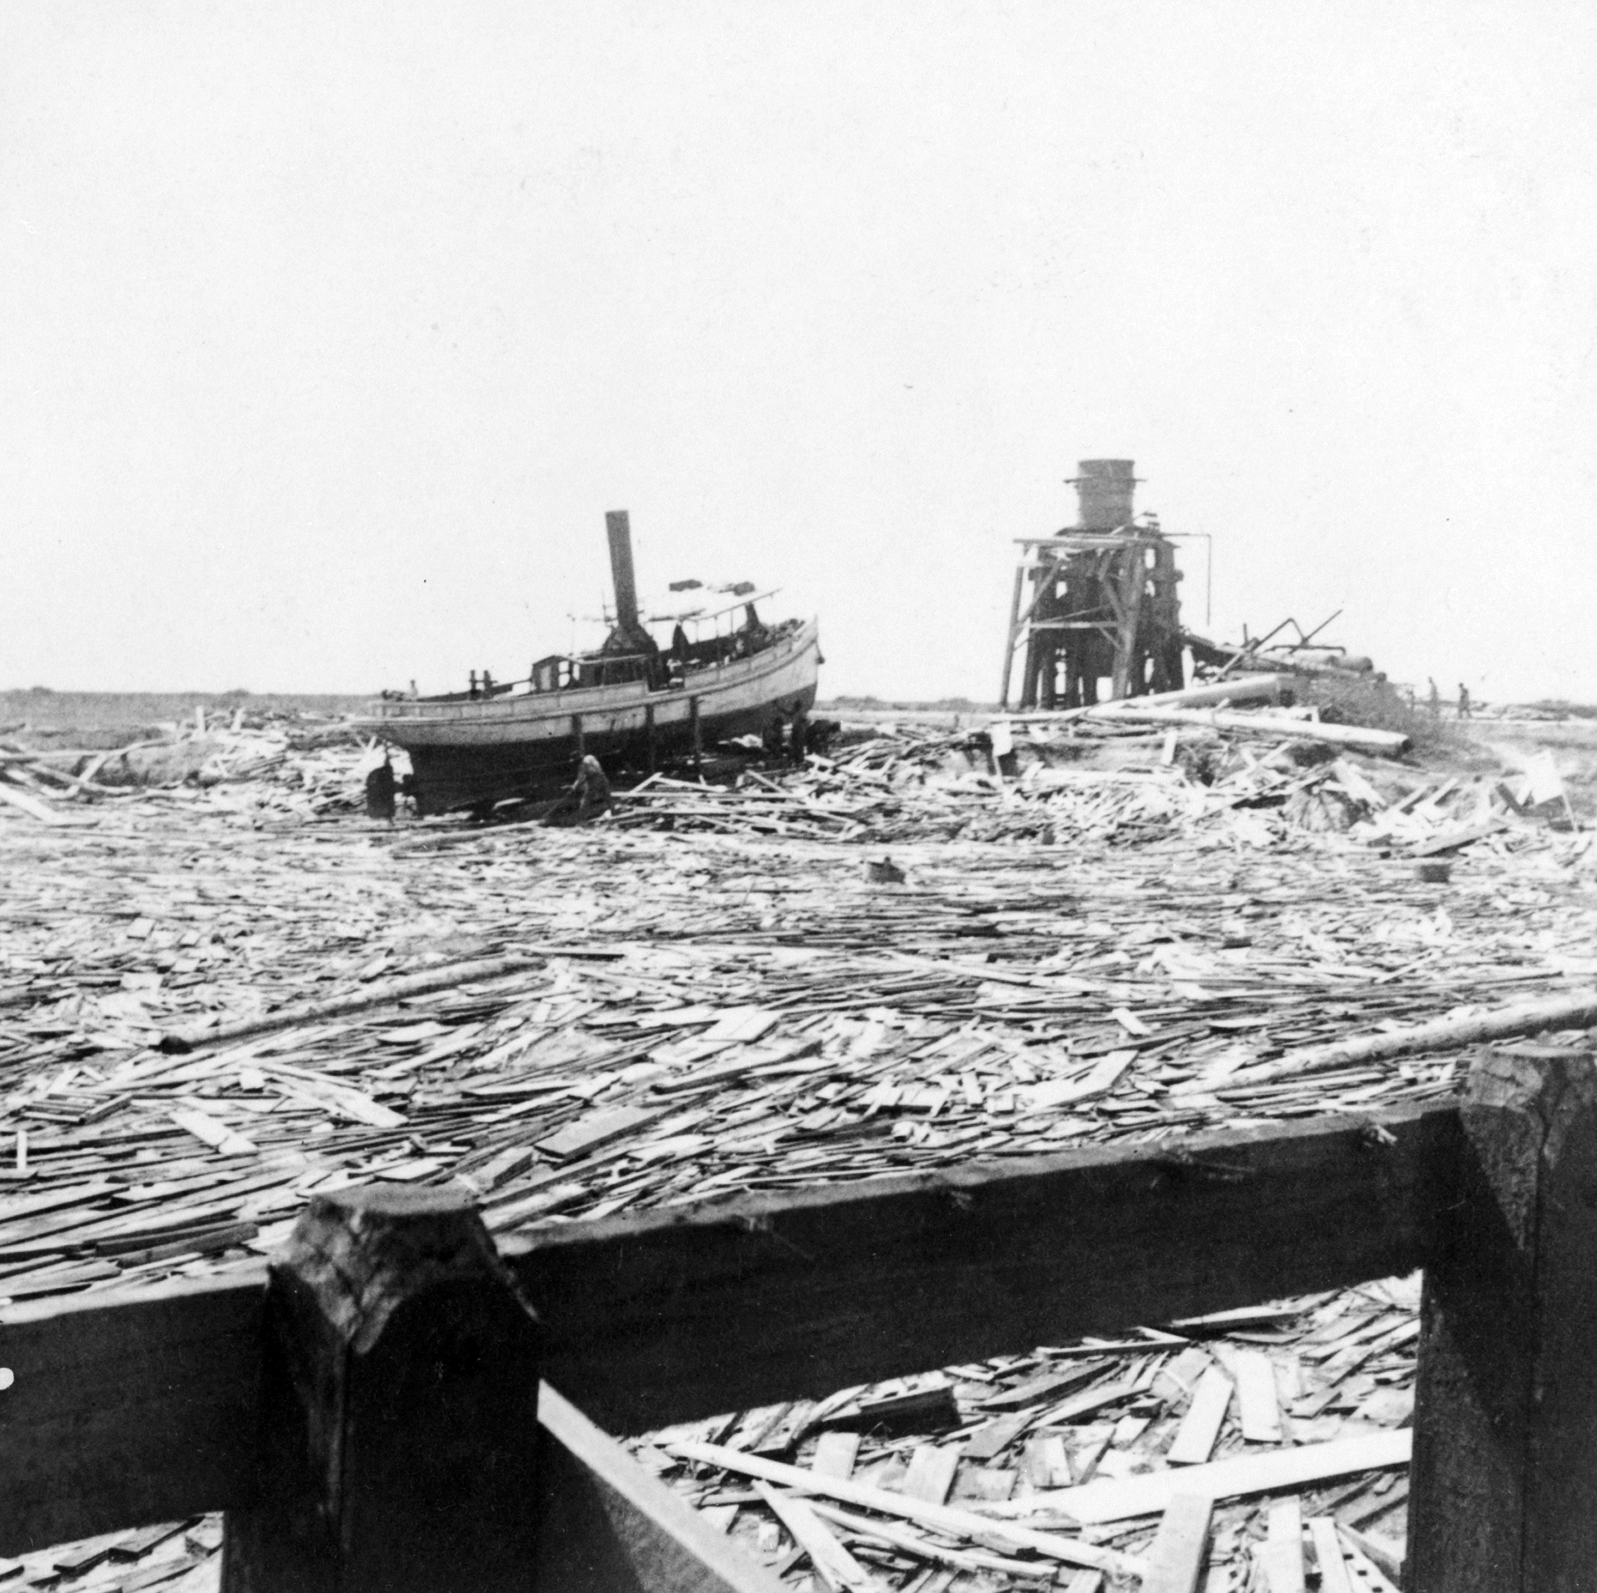 The Galveston waterfront was devastated by the Great Galveston Hurricane of 1900. (Library of Congress)